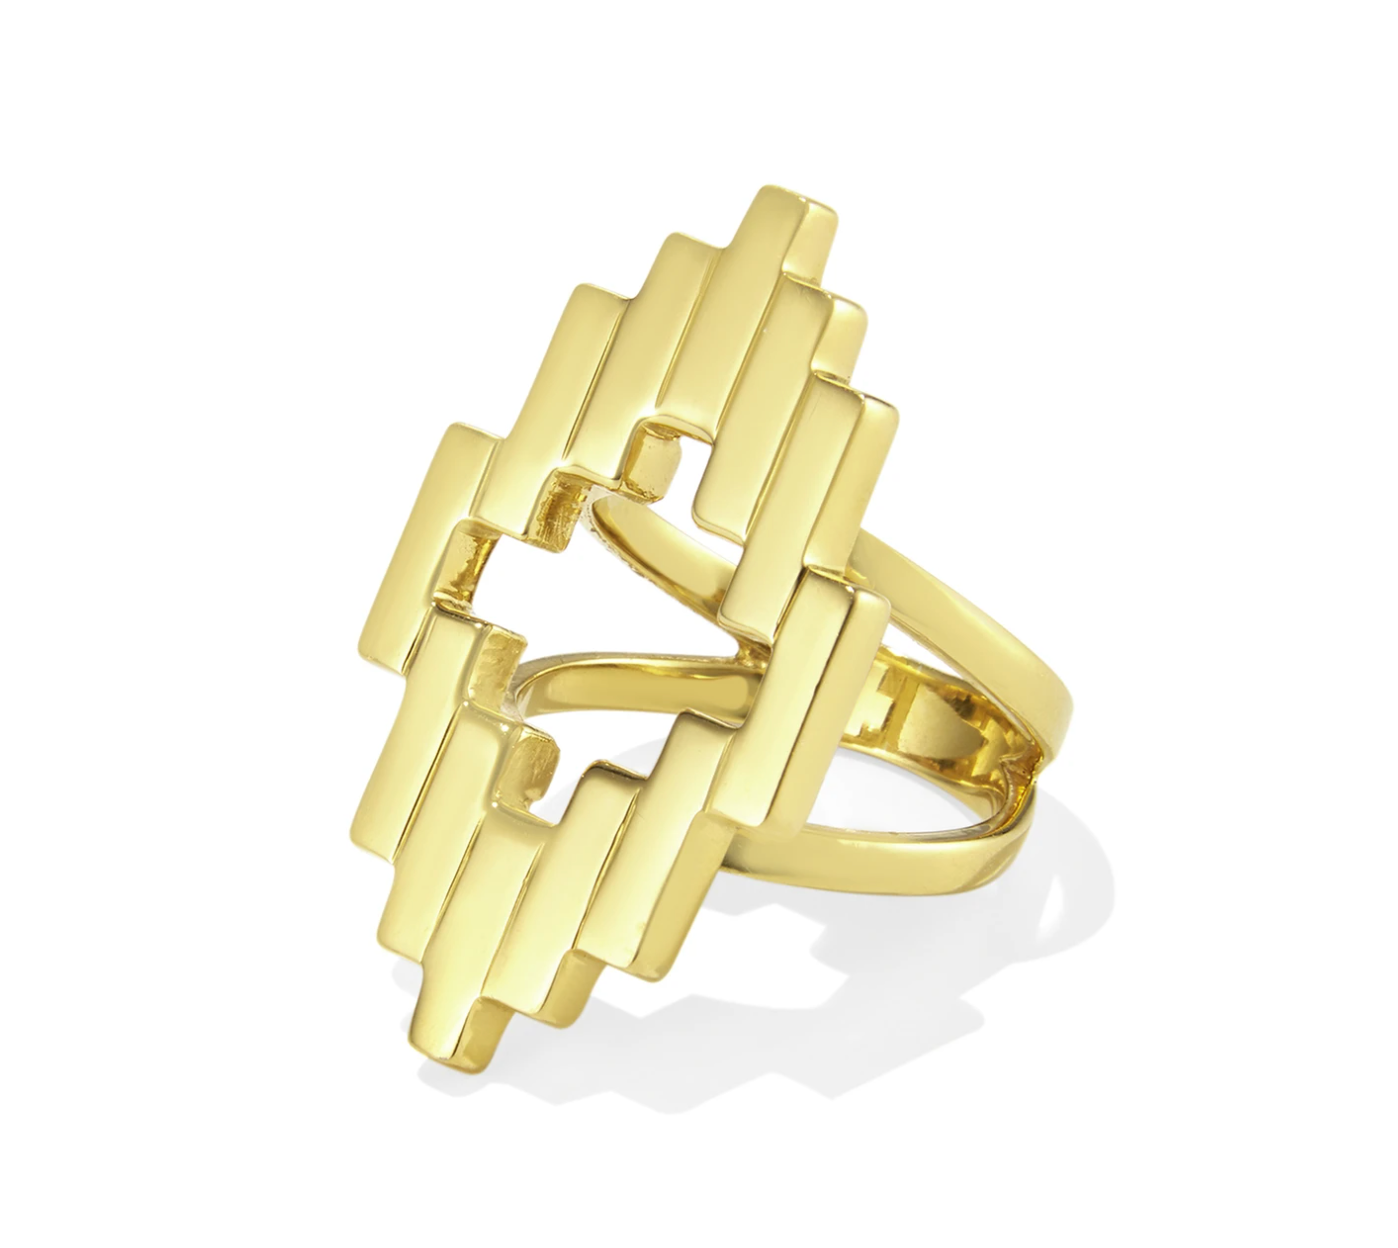 gold plated silver giametric ring pictured in front of a white background